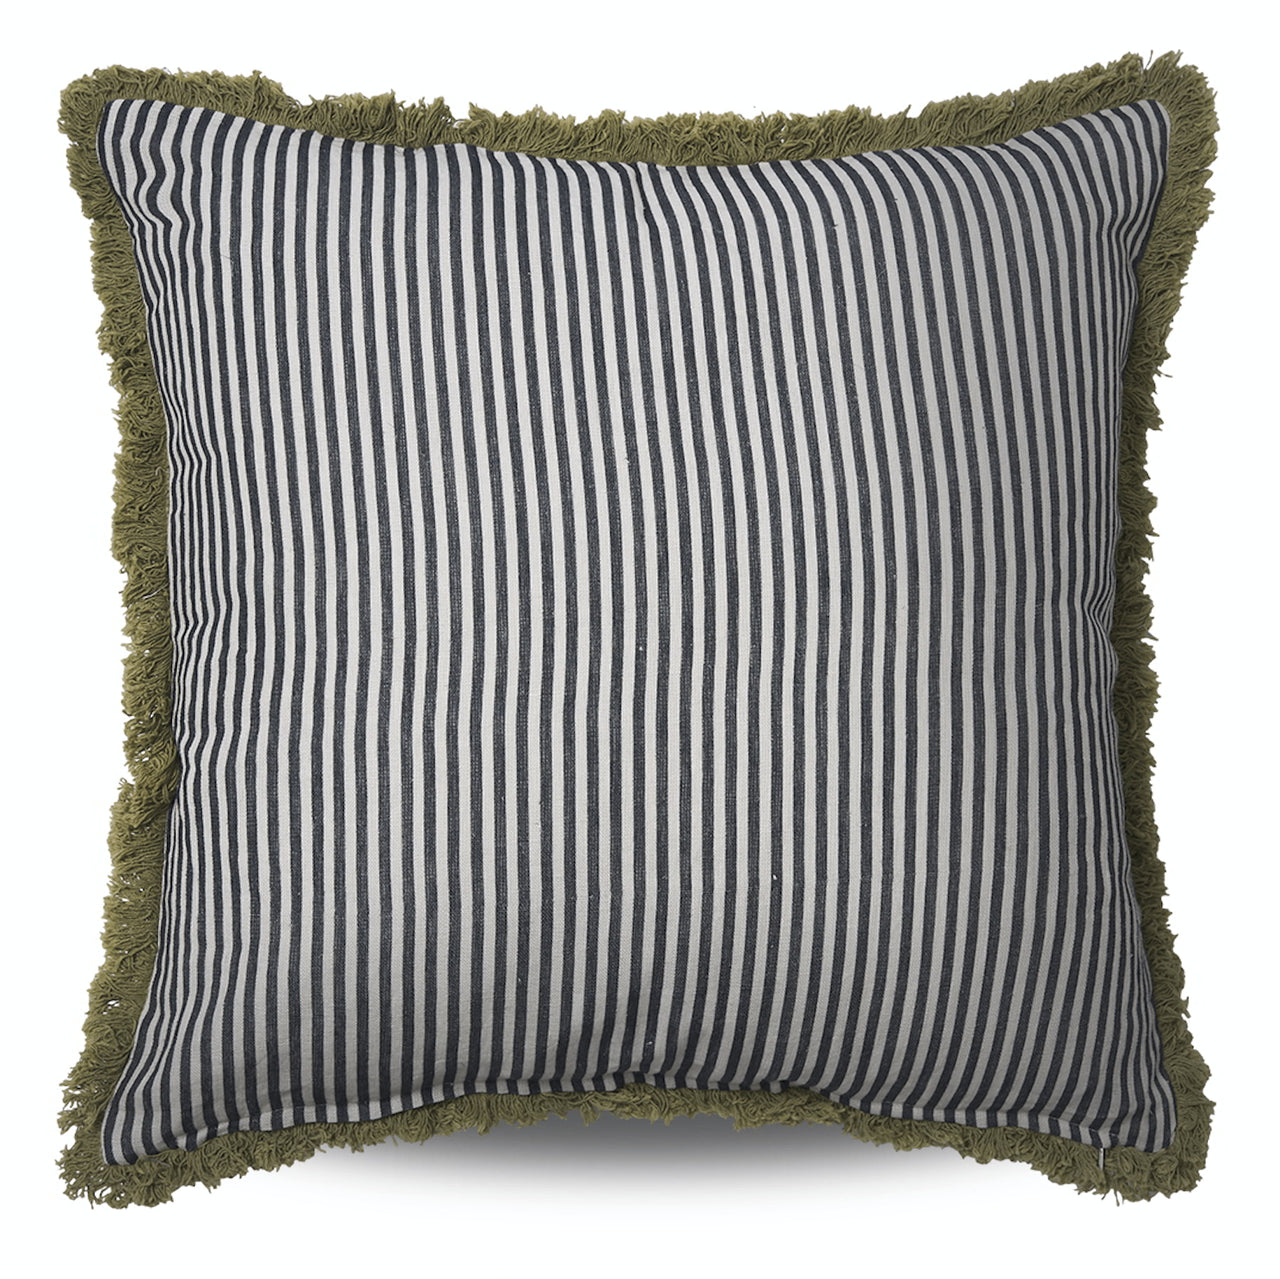 Ravello Conca Cushion House of Dudley